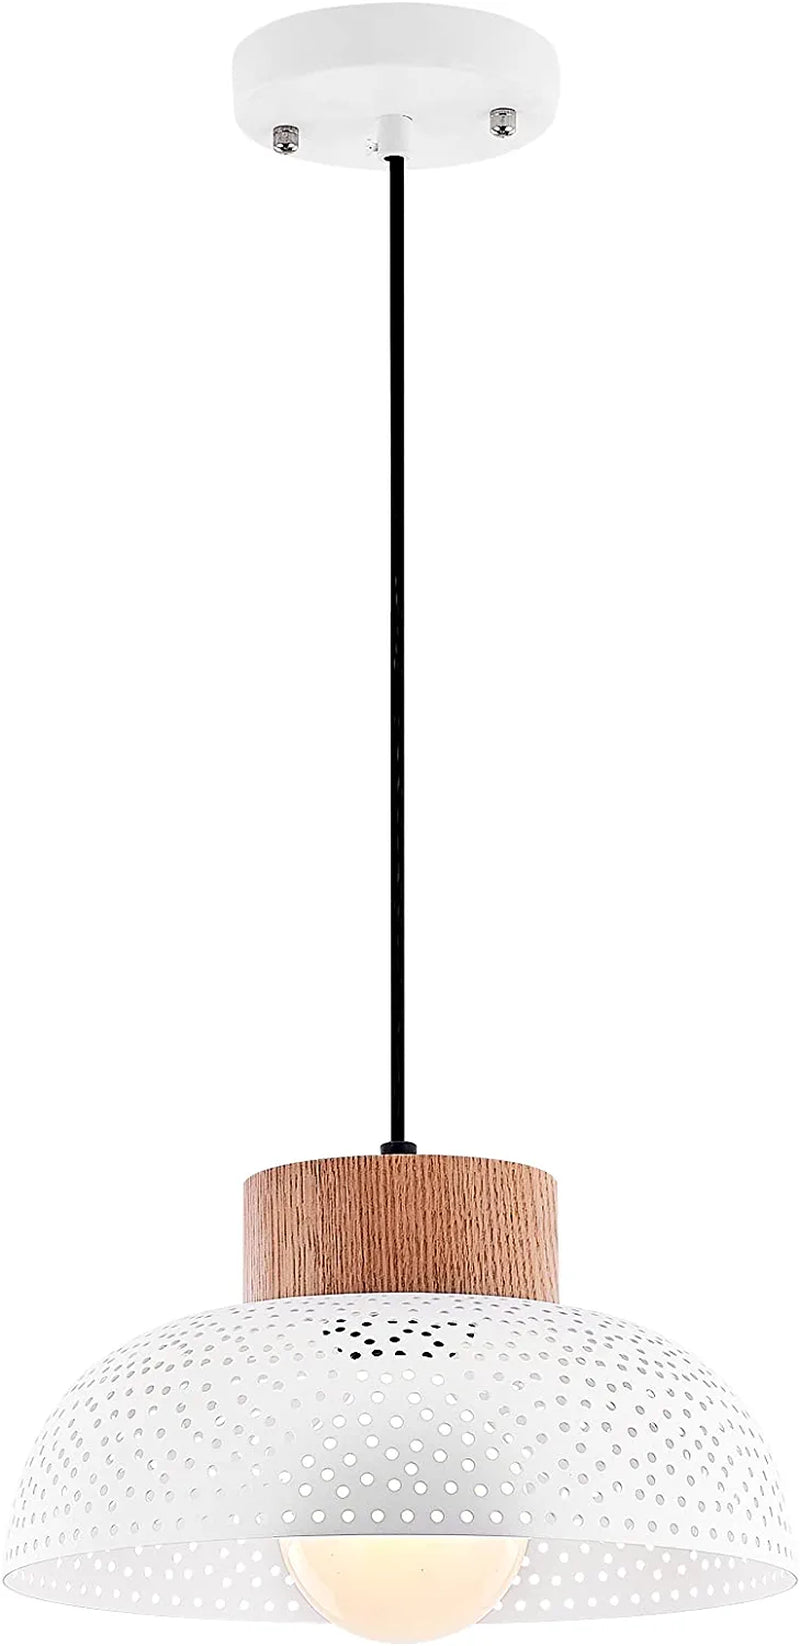 Tehenoo Modern Matte White Pendant Light Fixture,Perforated Pattern Dome Lampshade Hanging Ceiling Light for Hallway,Kitchen Island,Dining Table,Bar,Living Room Home & Garden > Lighting > Lighting Fixtures TeHenoo Wood White  